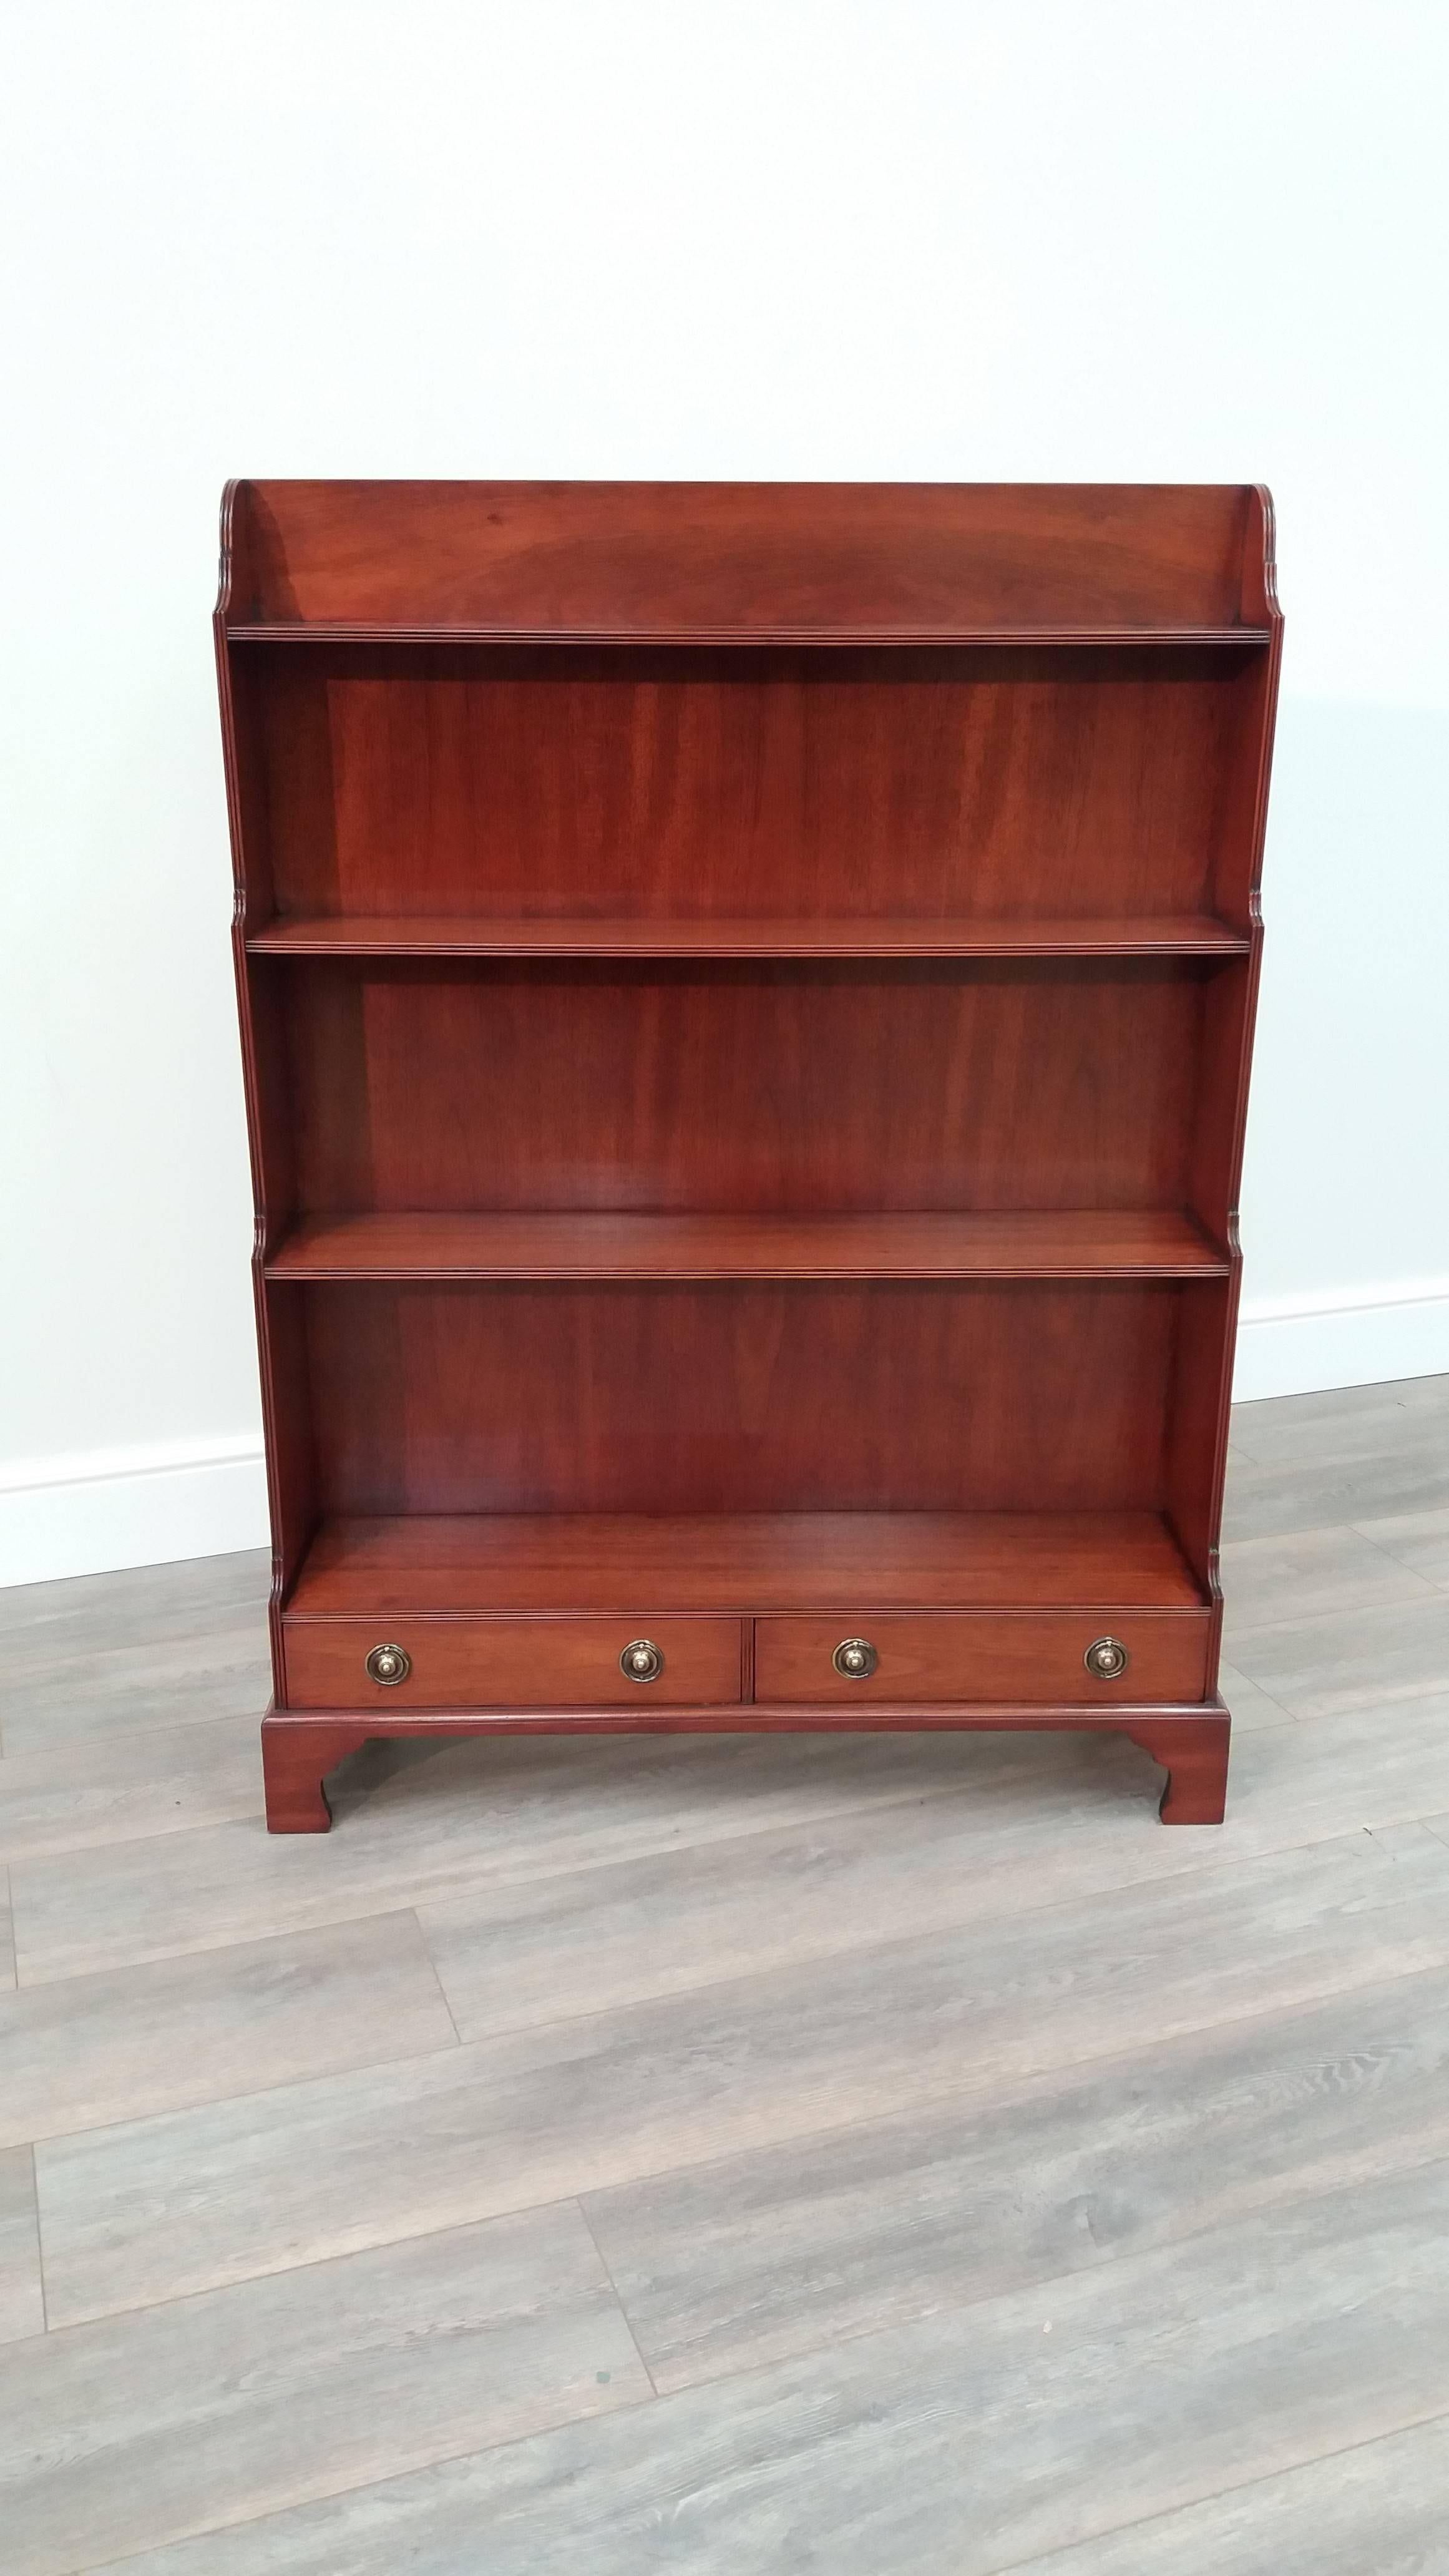 A mahogany open bookcase on bracket feet with four graduated shelves above two drawers.

Arthur Brett is a long-established English cabinet making business producing high quality furniture, specializing in bespoke commissions and renowned for its